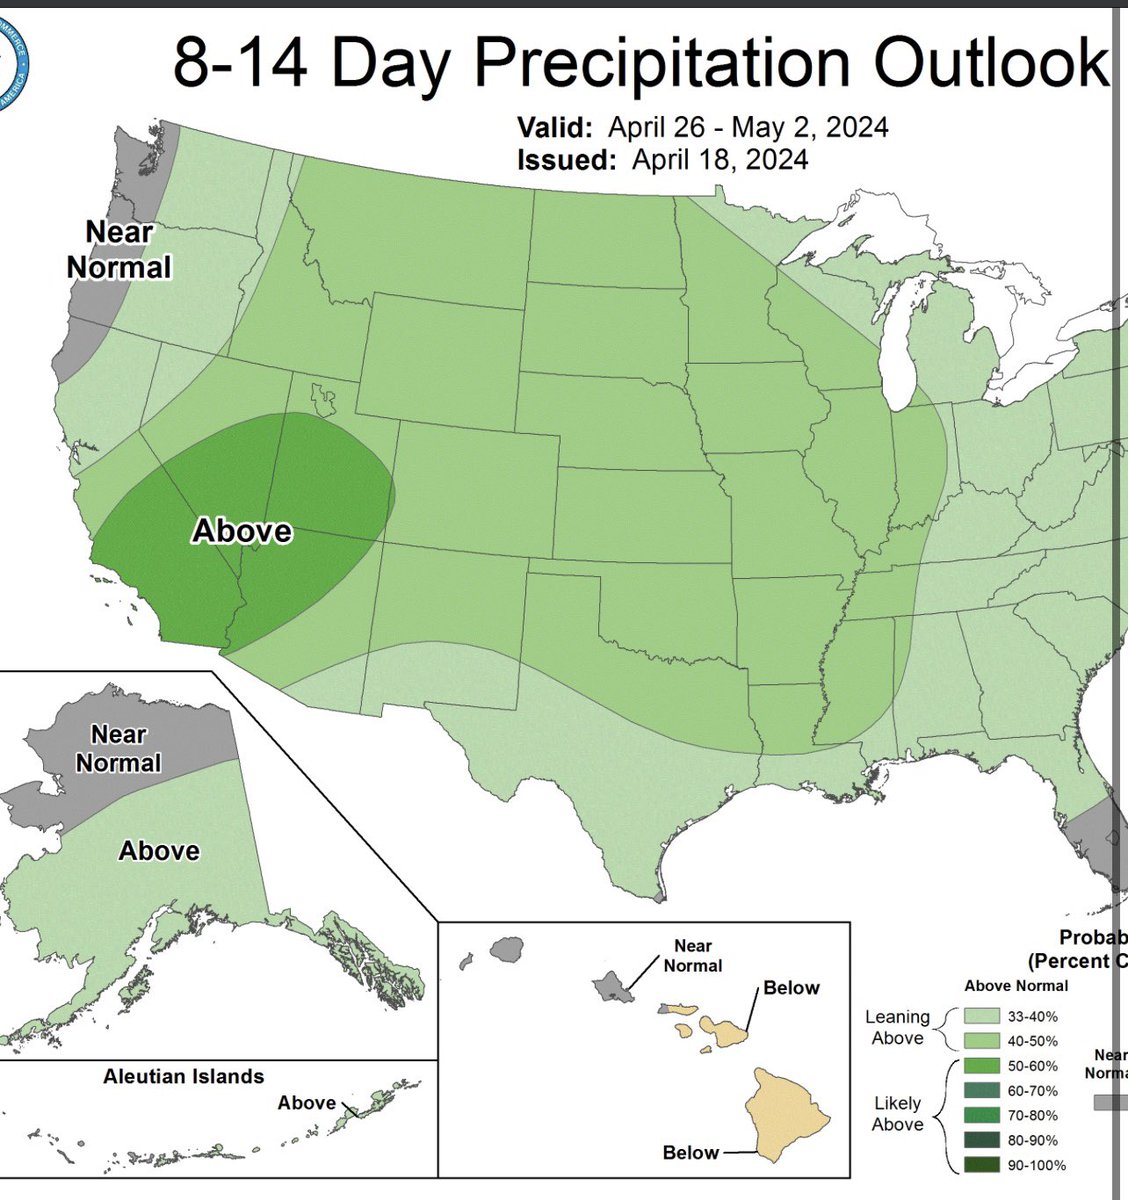 Thursday, April 18, 2:00 PM PDT: The latest CPC shows higher confidence in heavy rain from April 26 - May 2, 2024, for all of Southern California, the southern half of Nevada and Utah, and the northern sections of Arizona, including the Coachella Valley and Palm Springs.